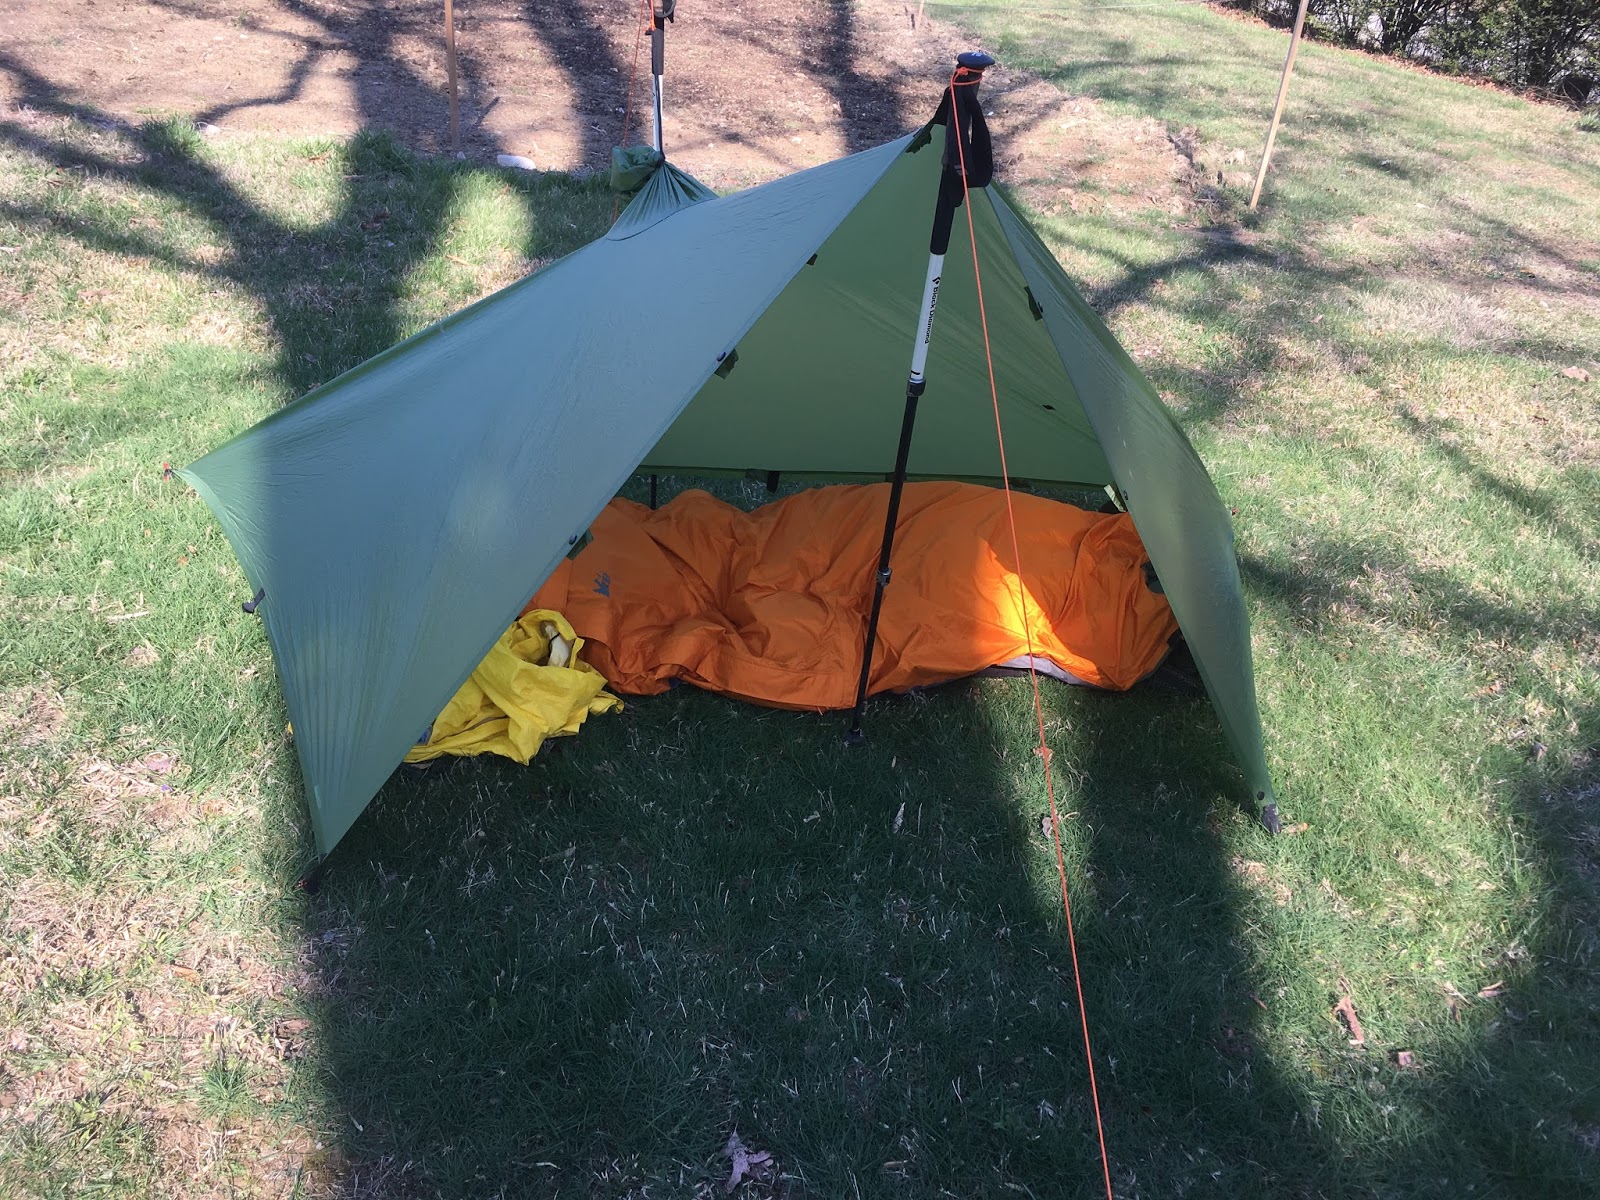 Poncho and Bivy setup pictures - how I up my camps